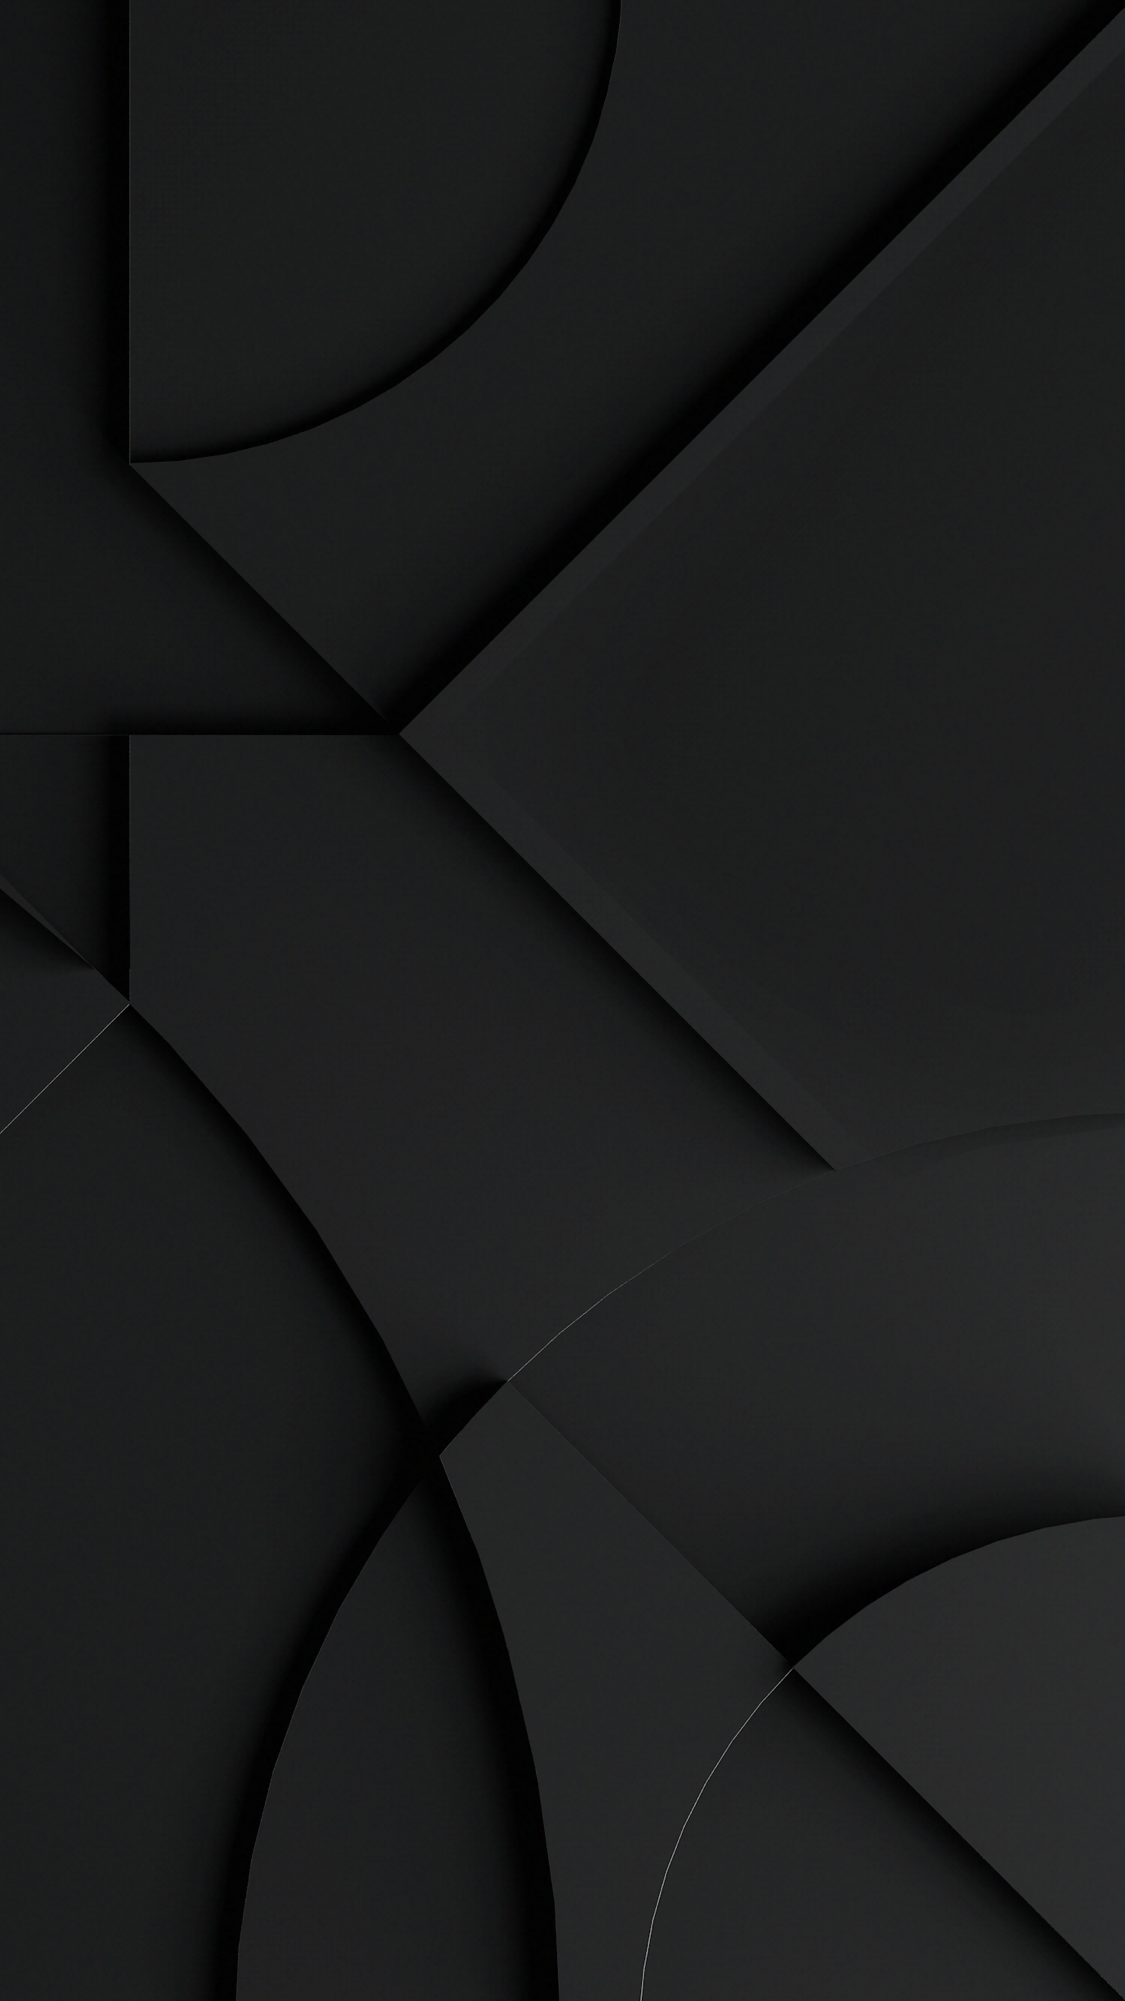 Black wallpaper. Black phone wallpaper, Black wallpaper, Android wallpaper